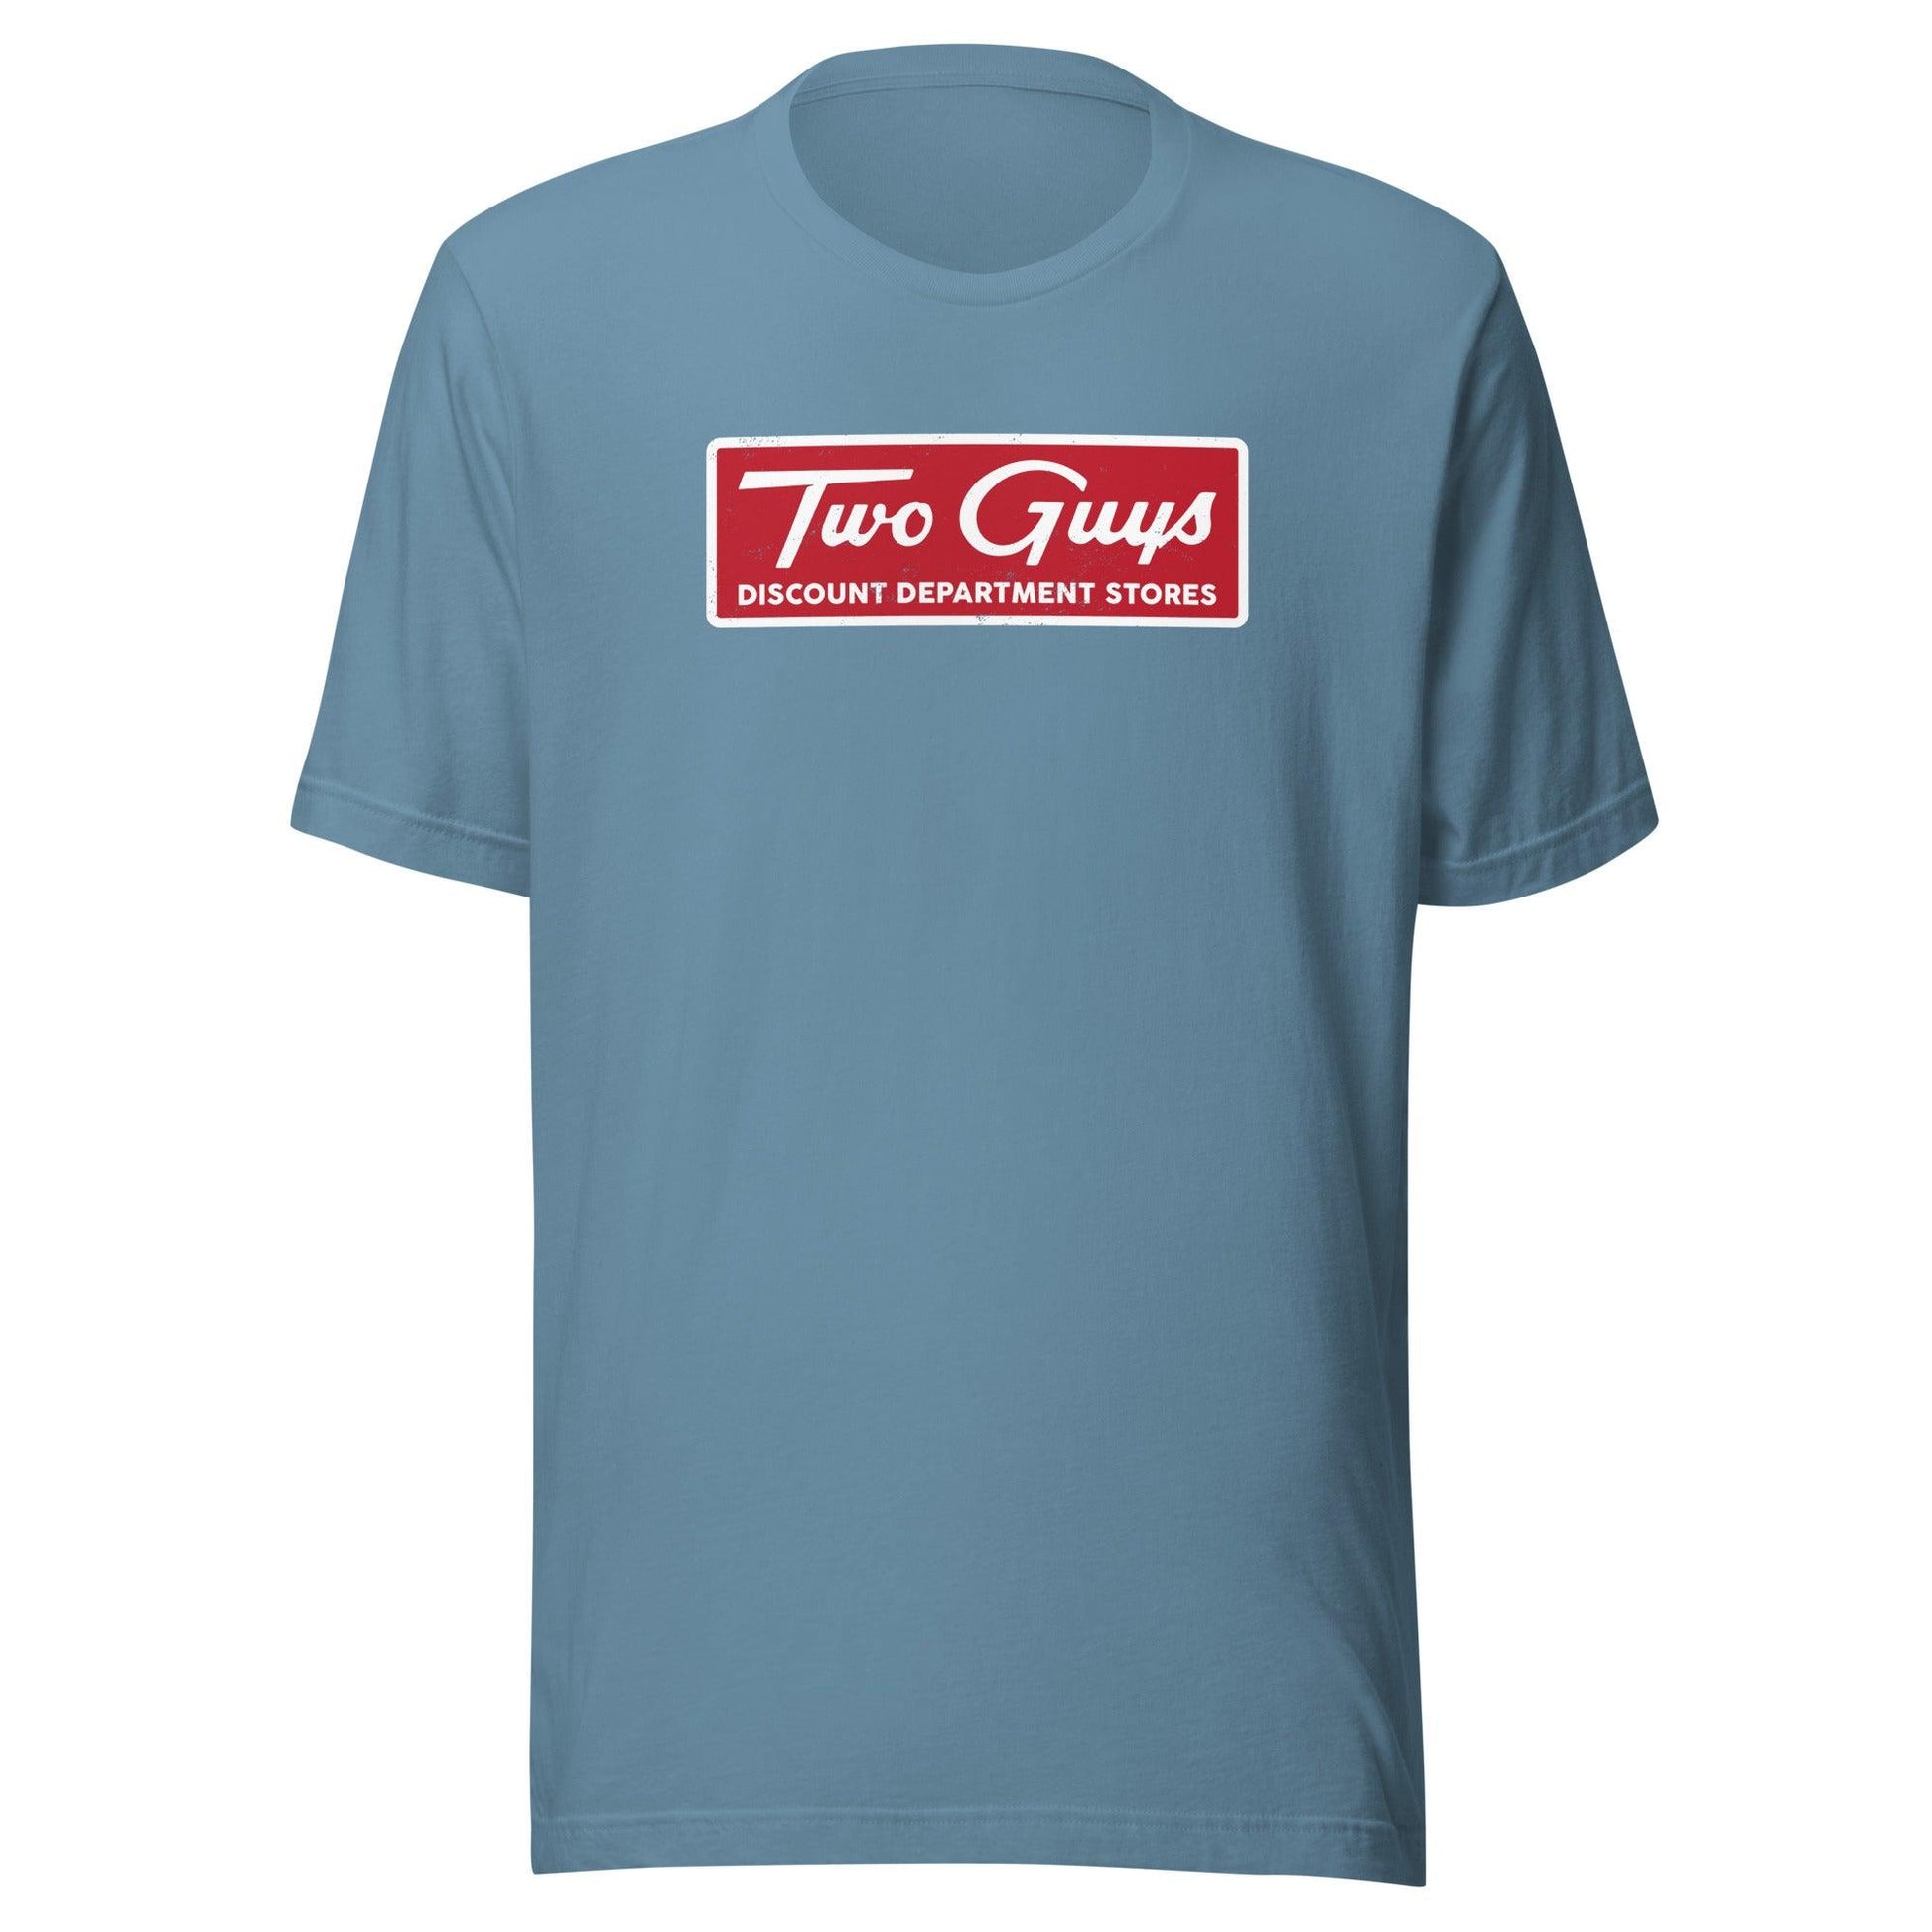 New Jersey Shirt Shop Vintage Retro Two Guys Discount Department Stores Unisex t-shirt